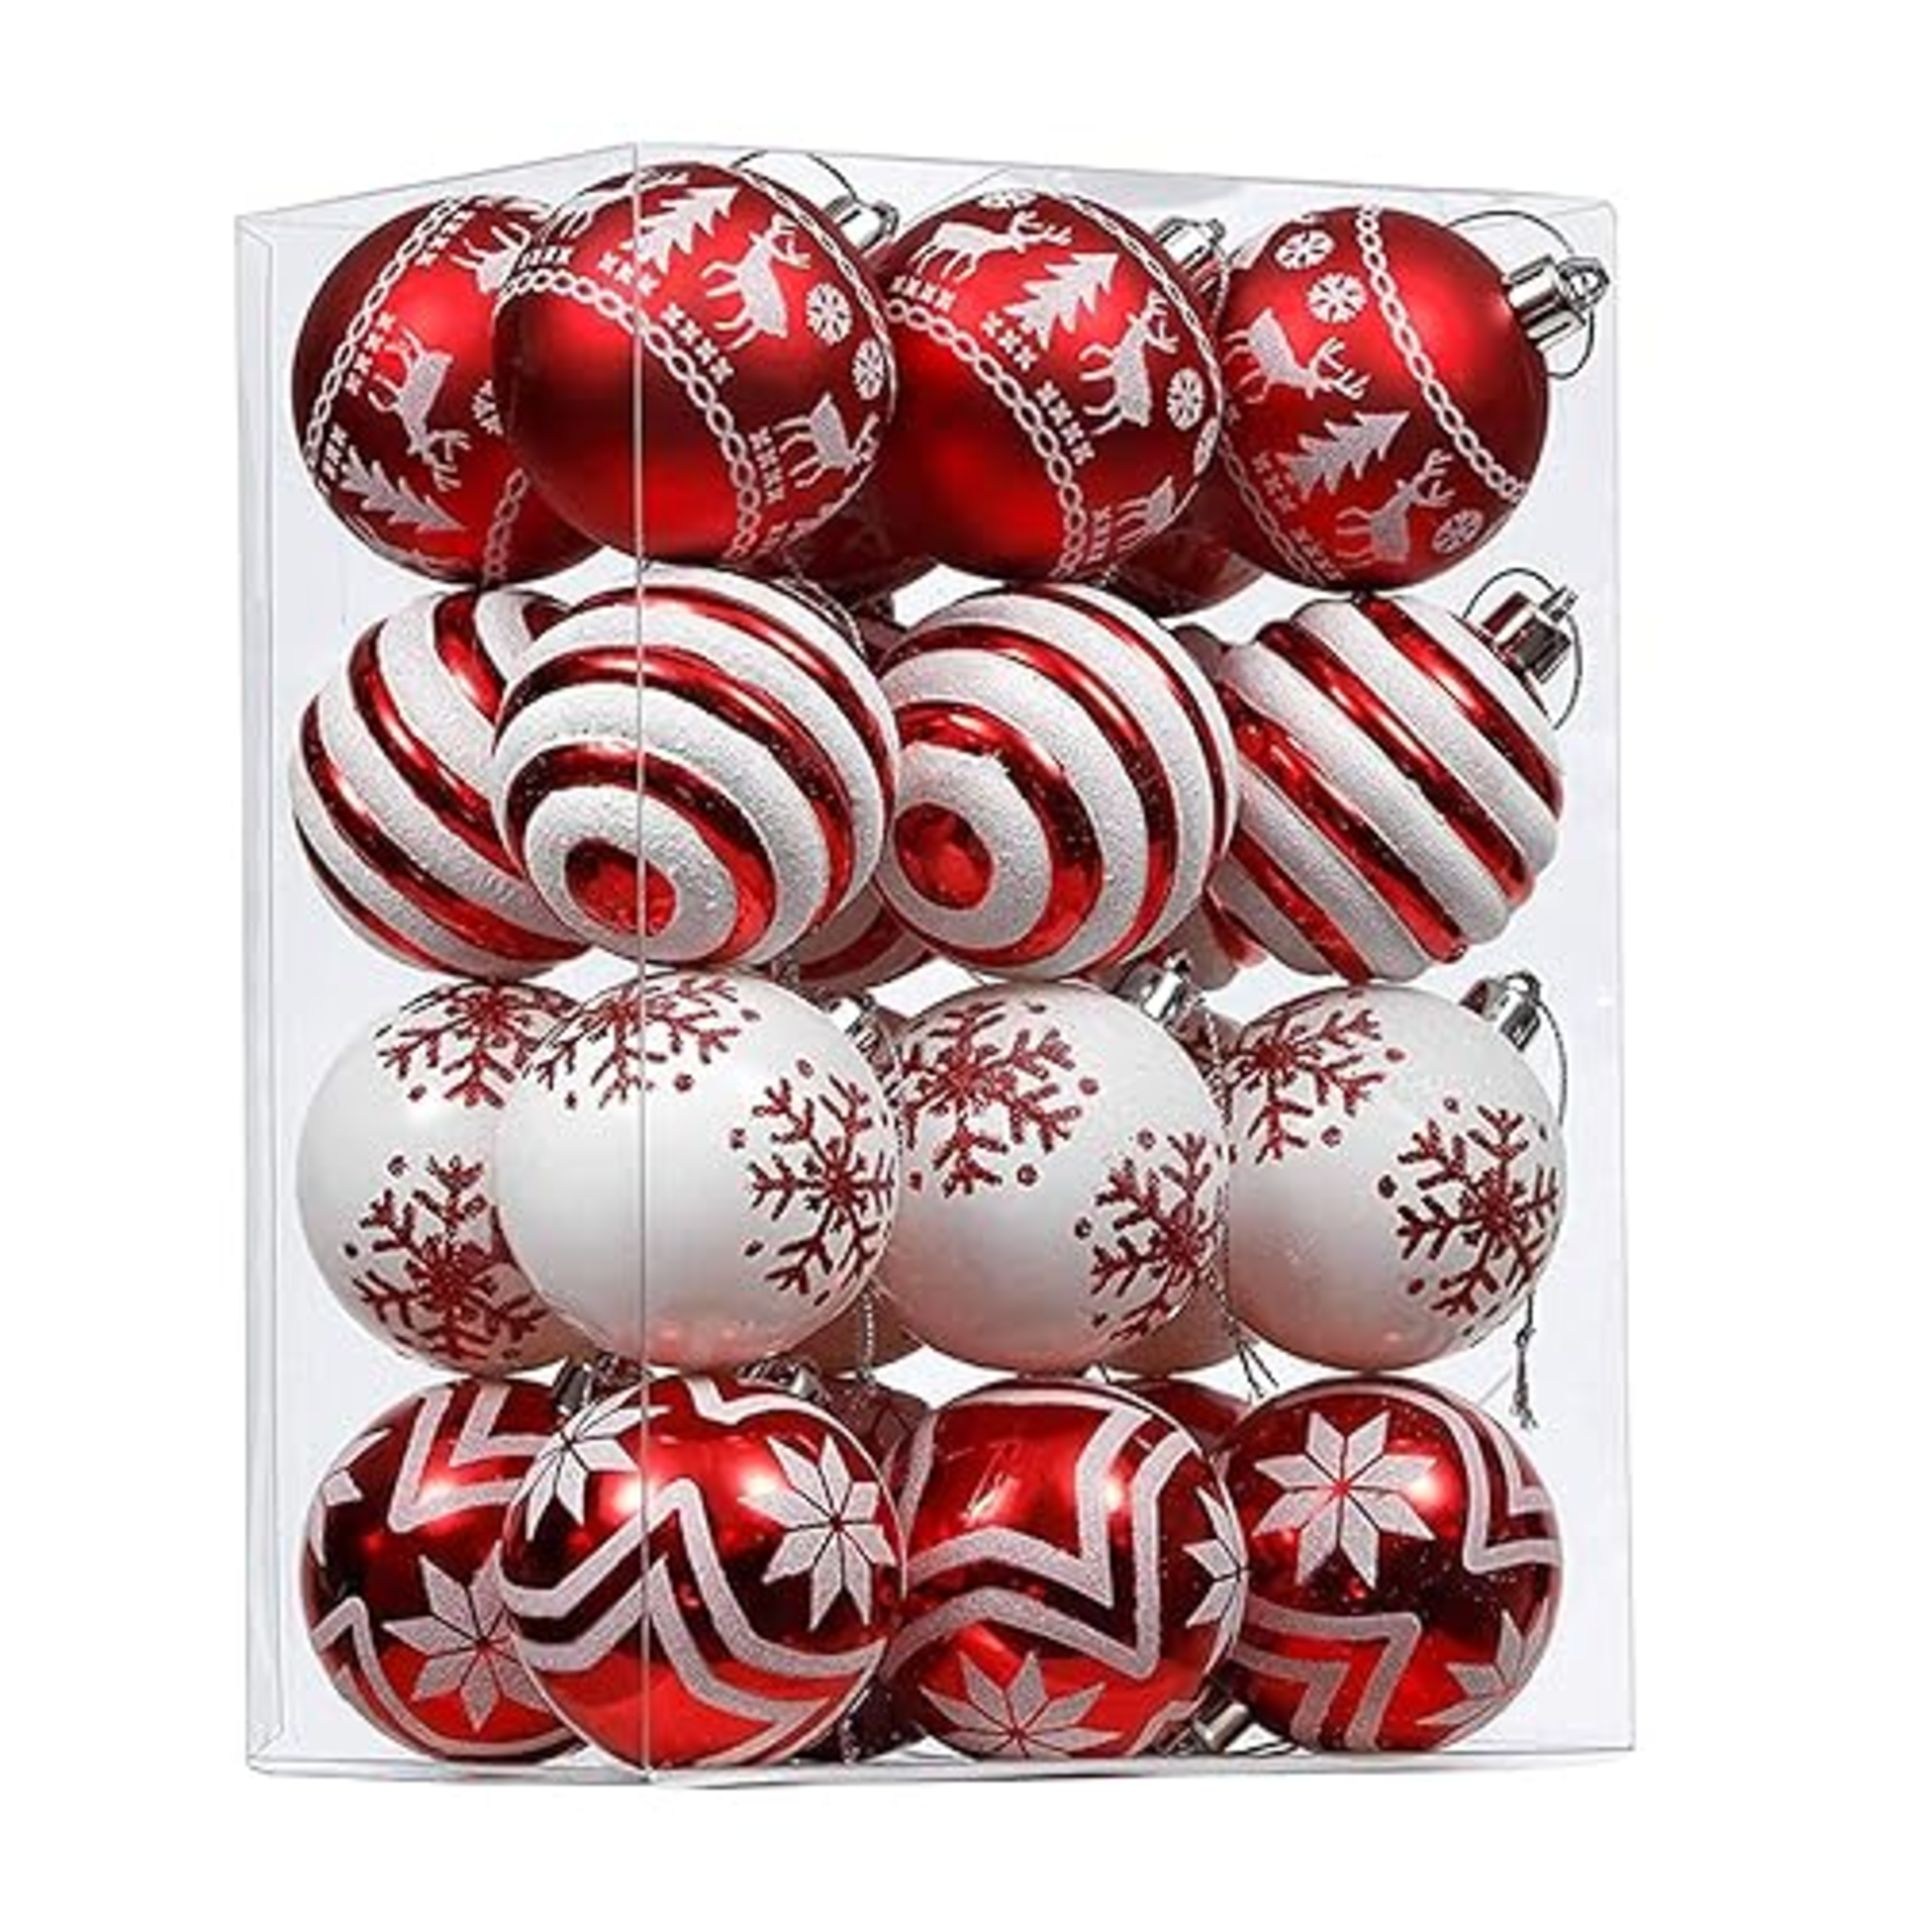 Hileyu 24 Pcs 6cm Red And White Baubles Christmas Decorations Xmas Ball Set Ornaments Shatterproof 